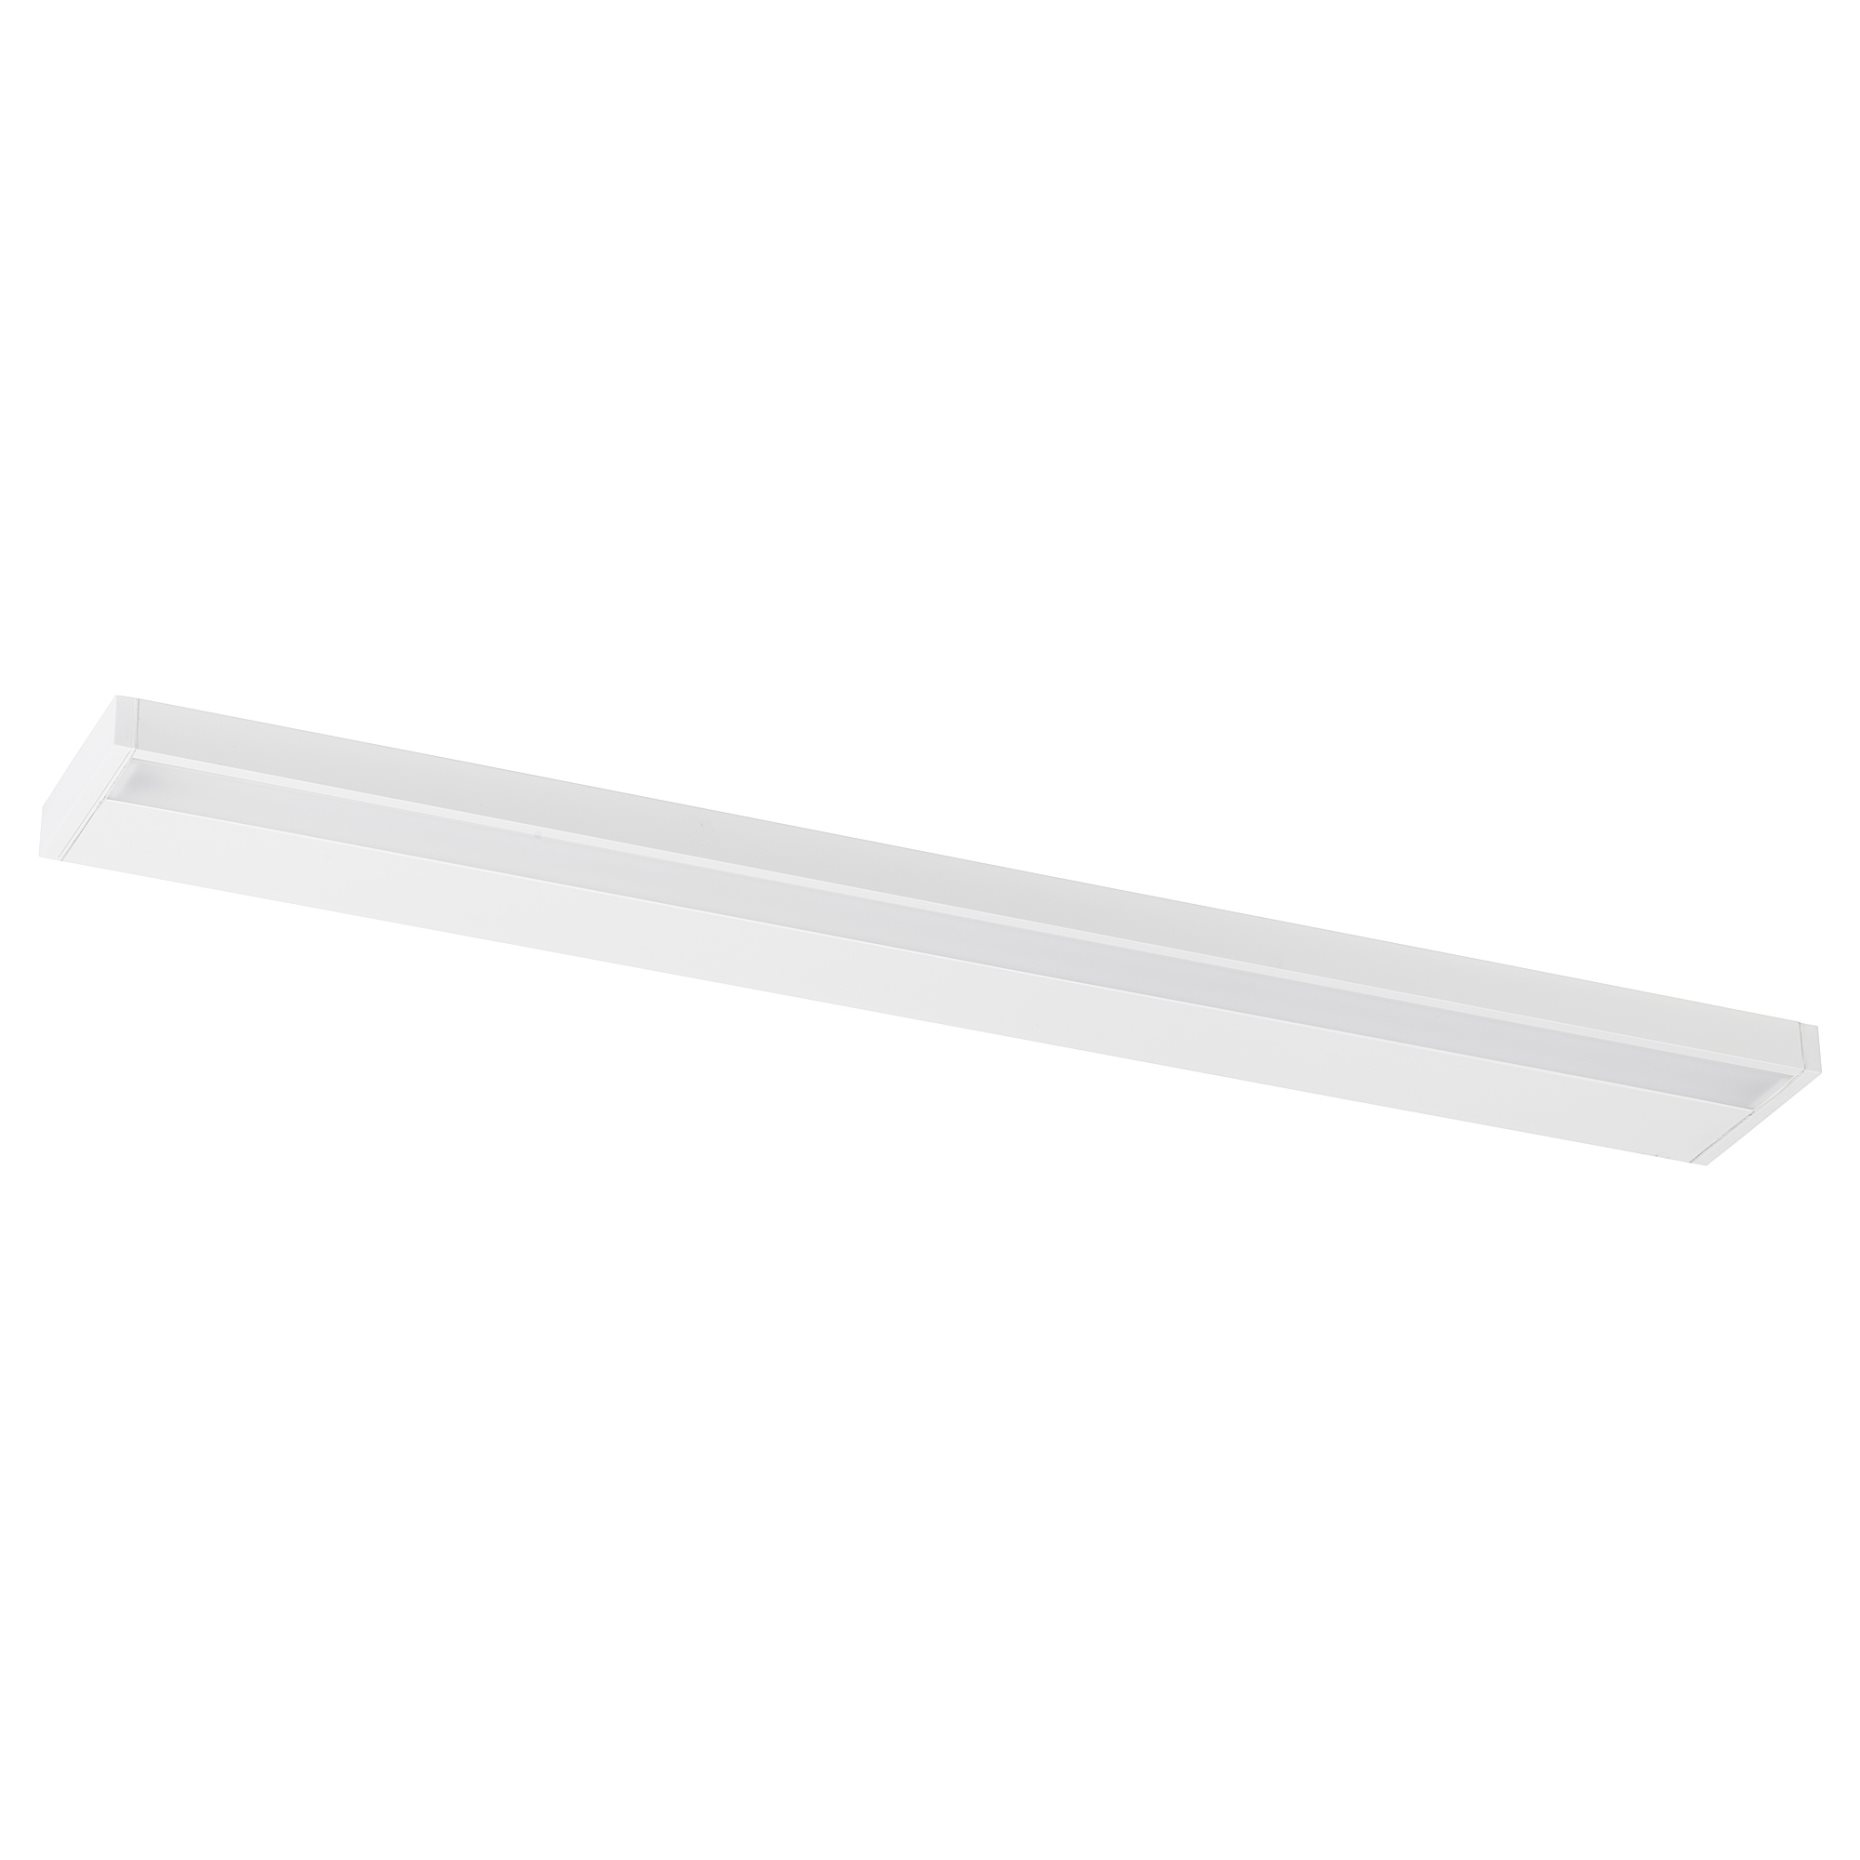 GODMORGON, cabinet/wall lighting with built-in LED light source, 100 cm, 905.373.94